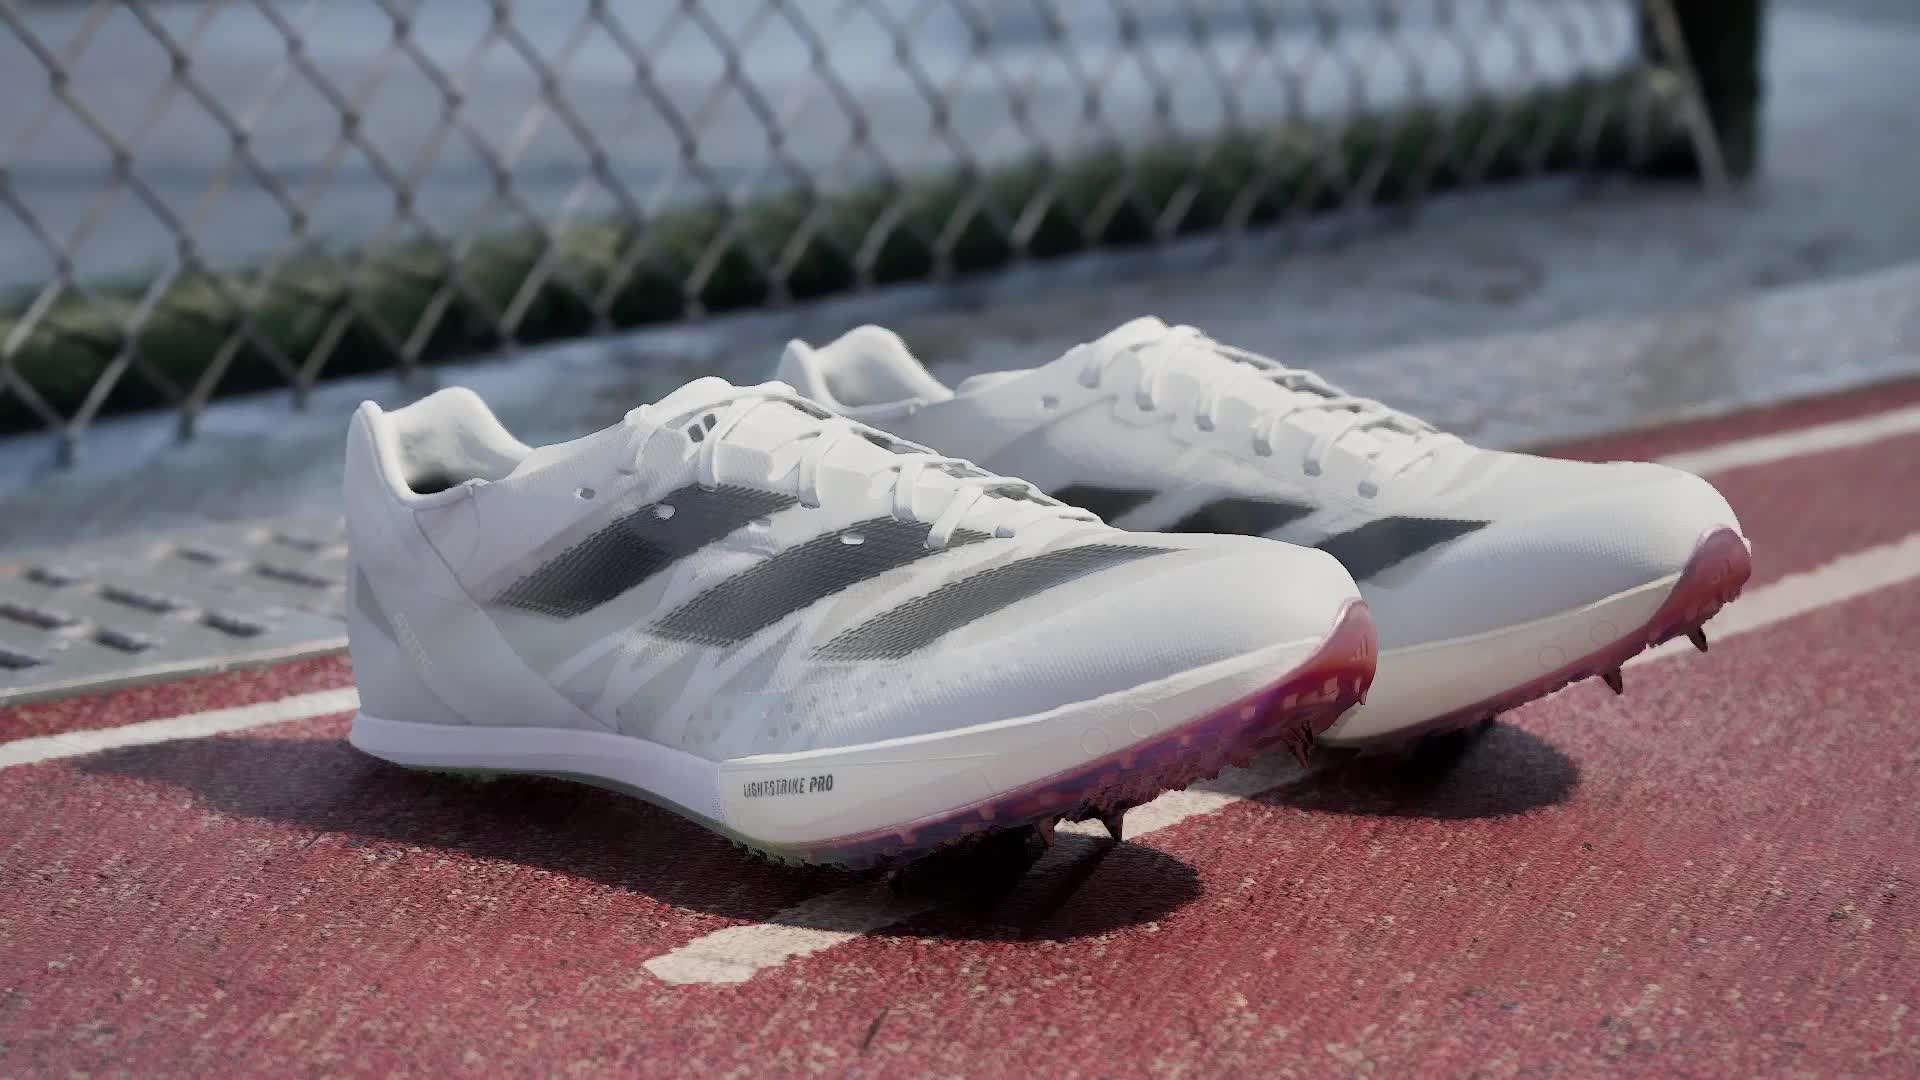 adidas Adizero Prime SP 2.0 Track and Field Lightstrike Shoes - White